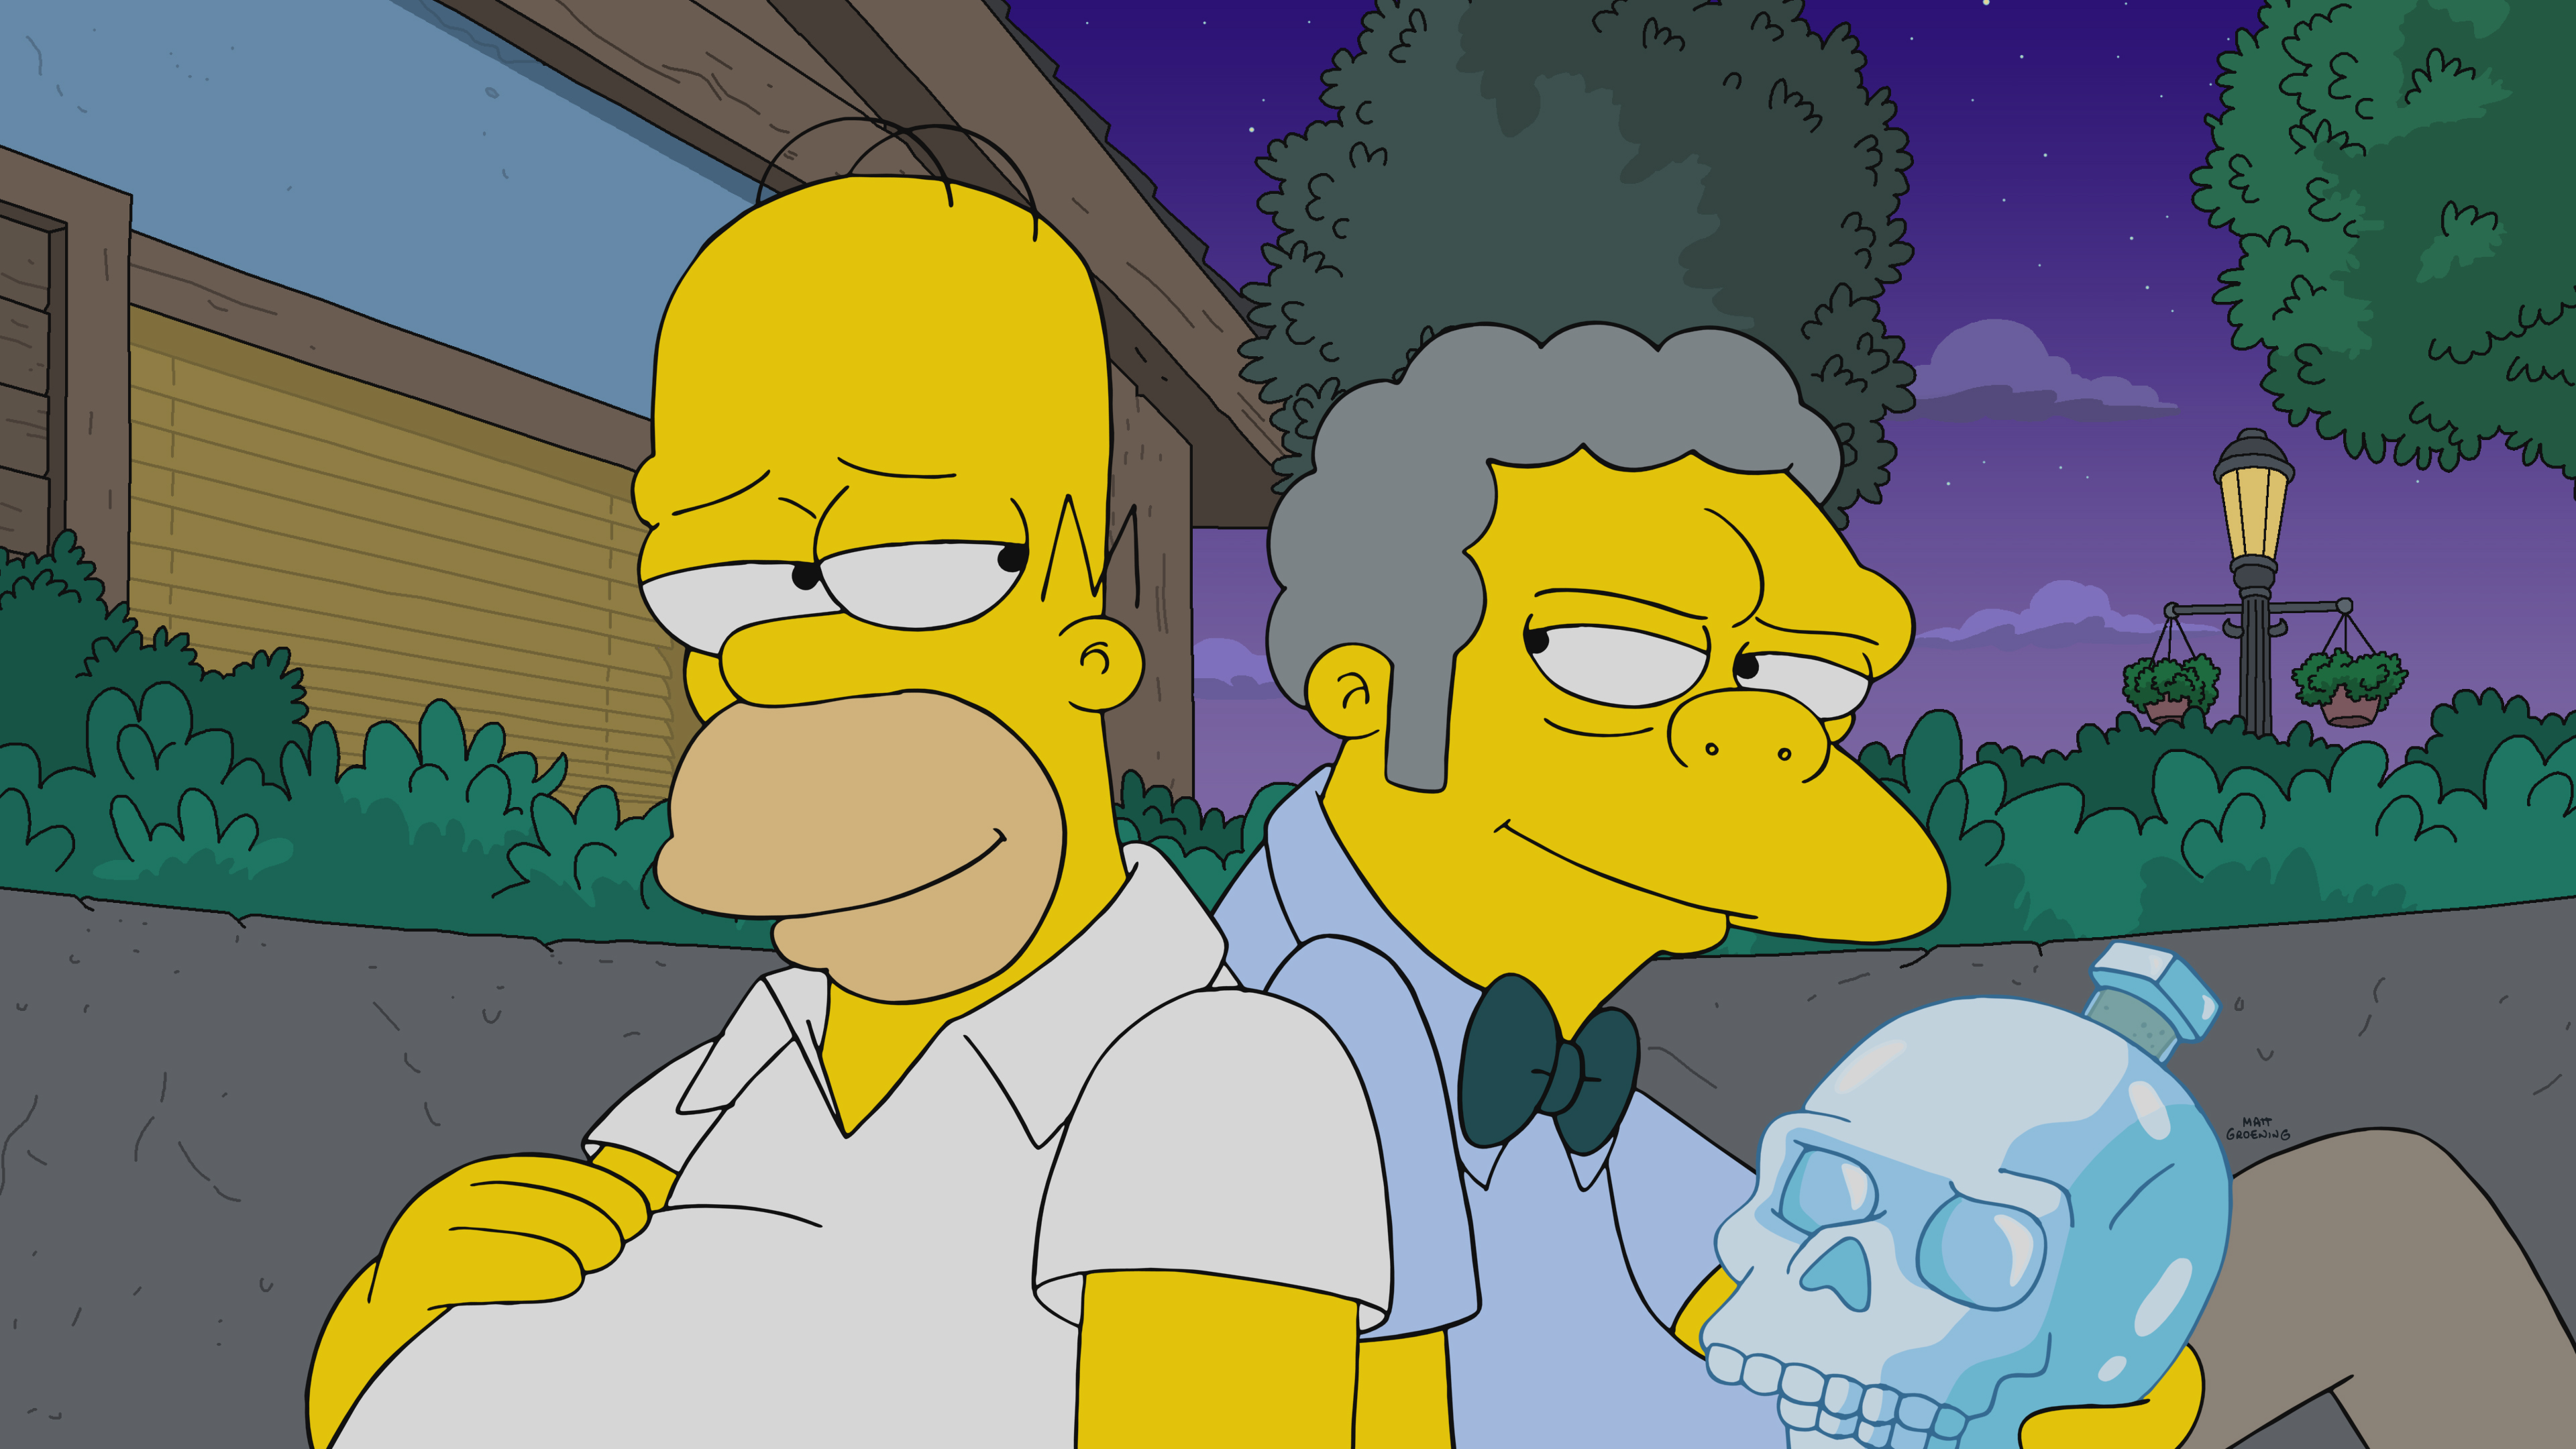 THE SIMPSONS: After Moe breaks their most sacred rule, a secret society of bartenders seeks ultimate vengeance on Homer and his friends in the ÒThe Last BarfighterÓ season finale episode of THE SIMPSONS airing Sunday, May 23 (8:00-8:30 PM ET/PT) on FOX. THE SIMPSONS © 2021 by 20th Television.